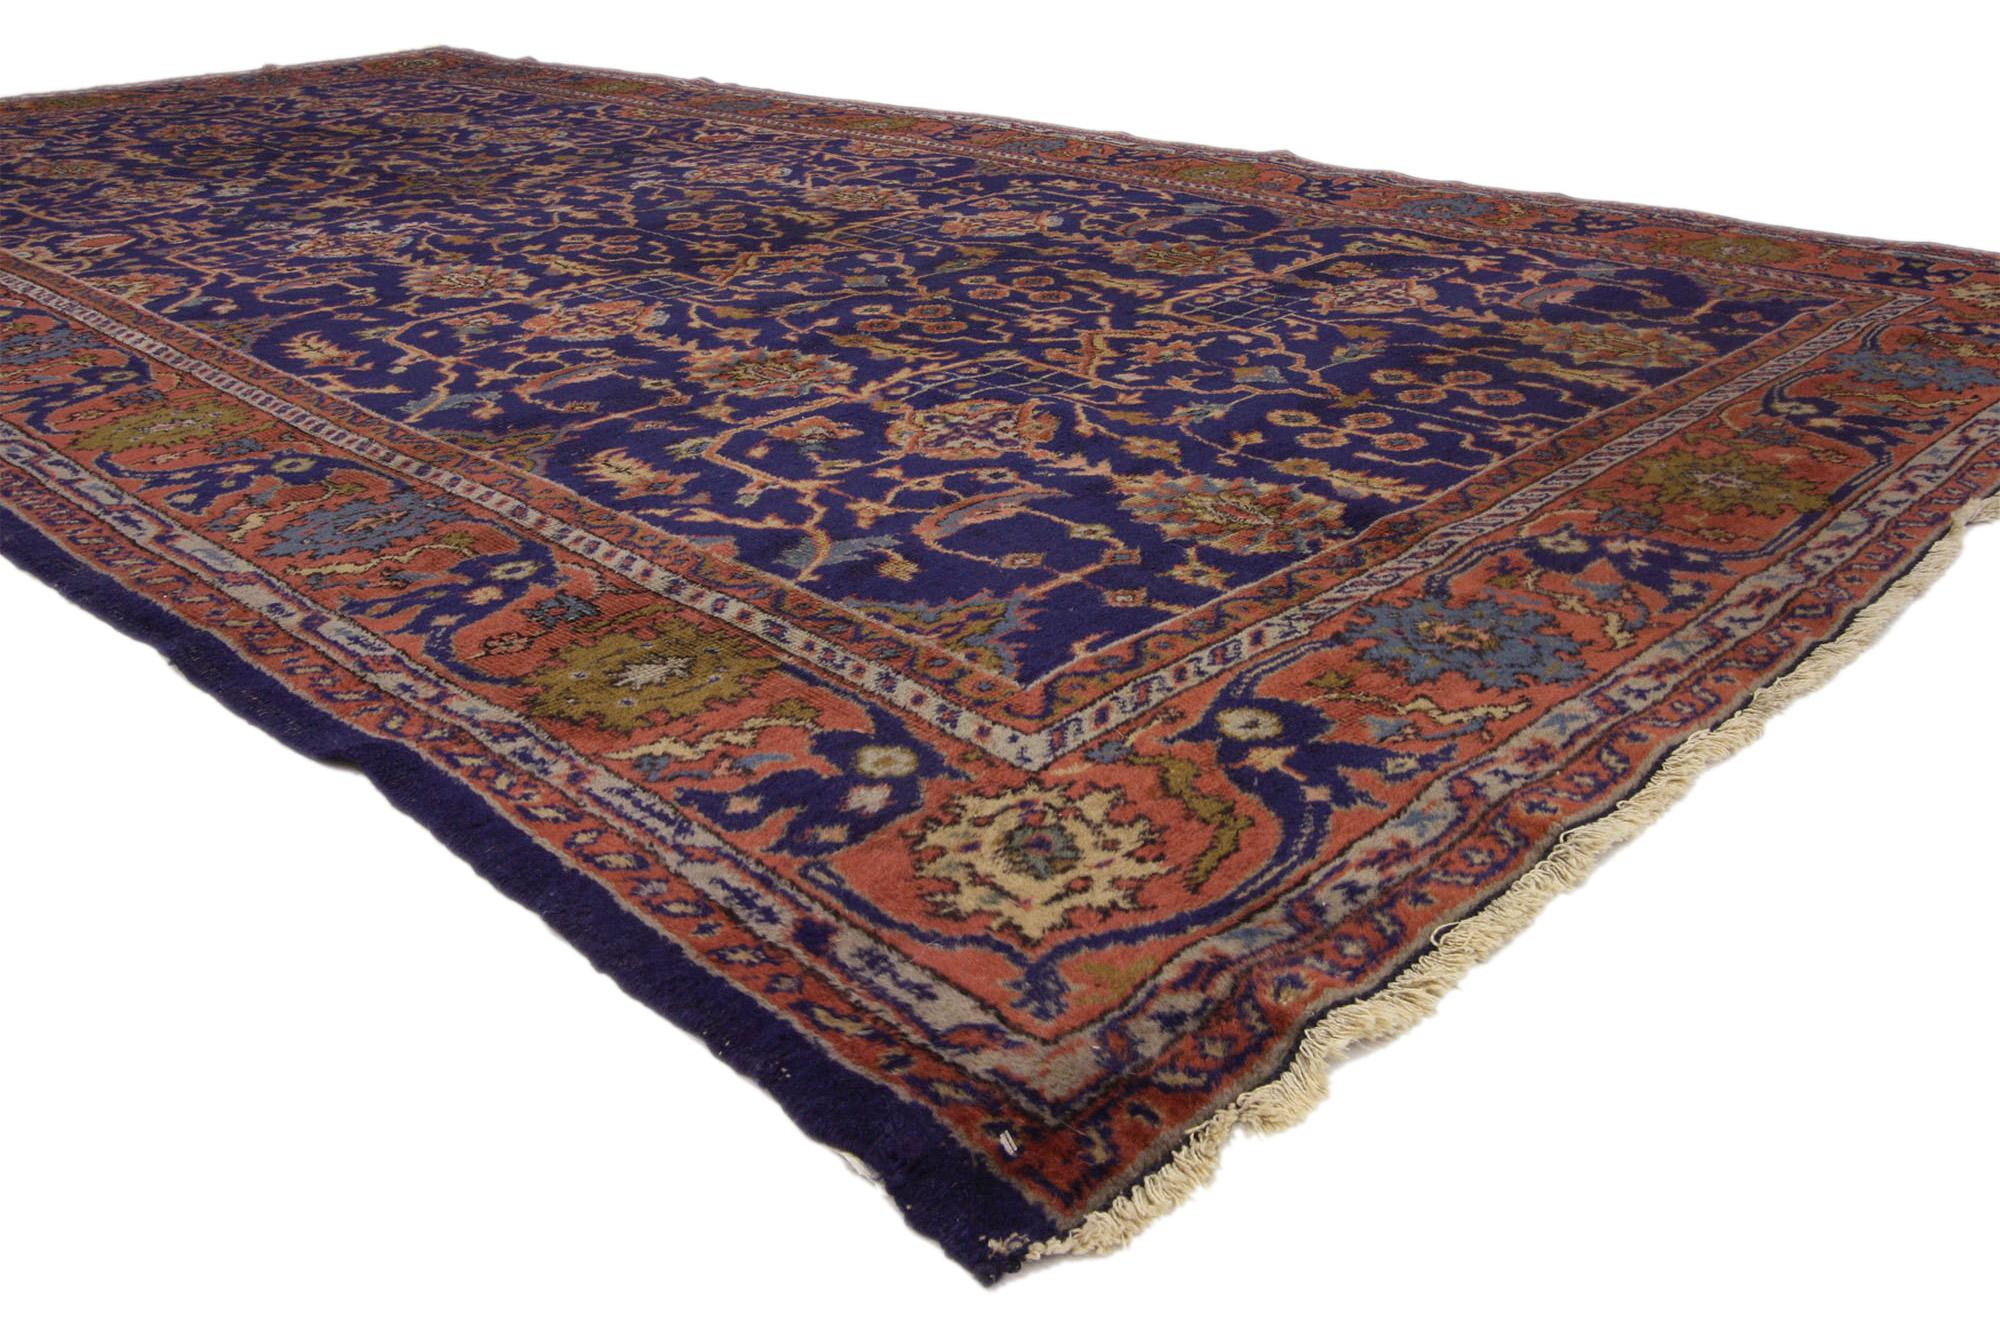 72074 Antique Turkish Sparta Rug, 06'01 x 11'08. Turkish Sparta gallery rugs are renowned for their fine craftsmanship and intricate designs, often showcased in expansive settings like galleries or grand halls to fully appreciate their beauty.